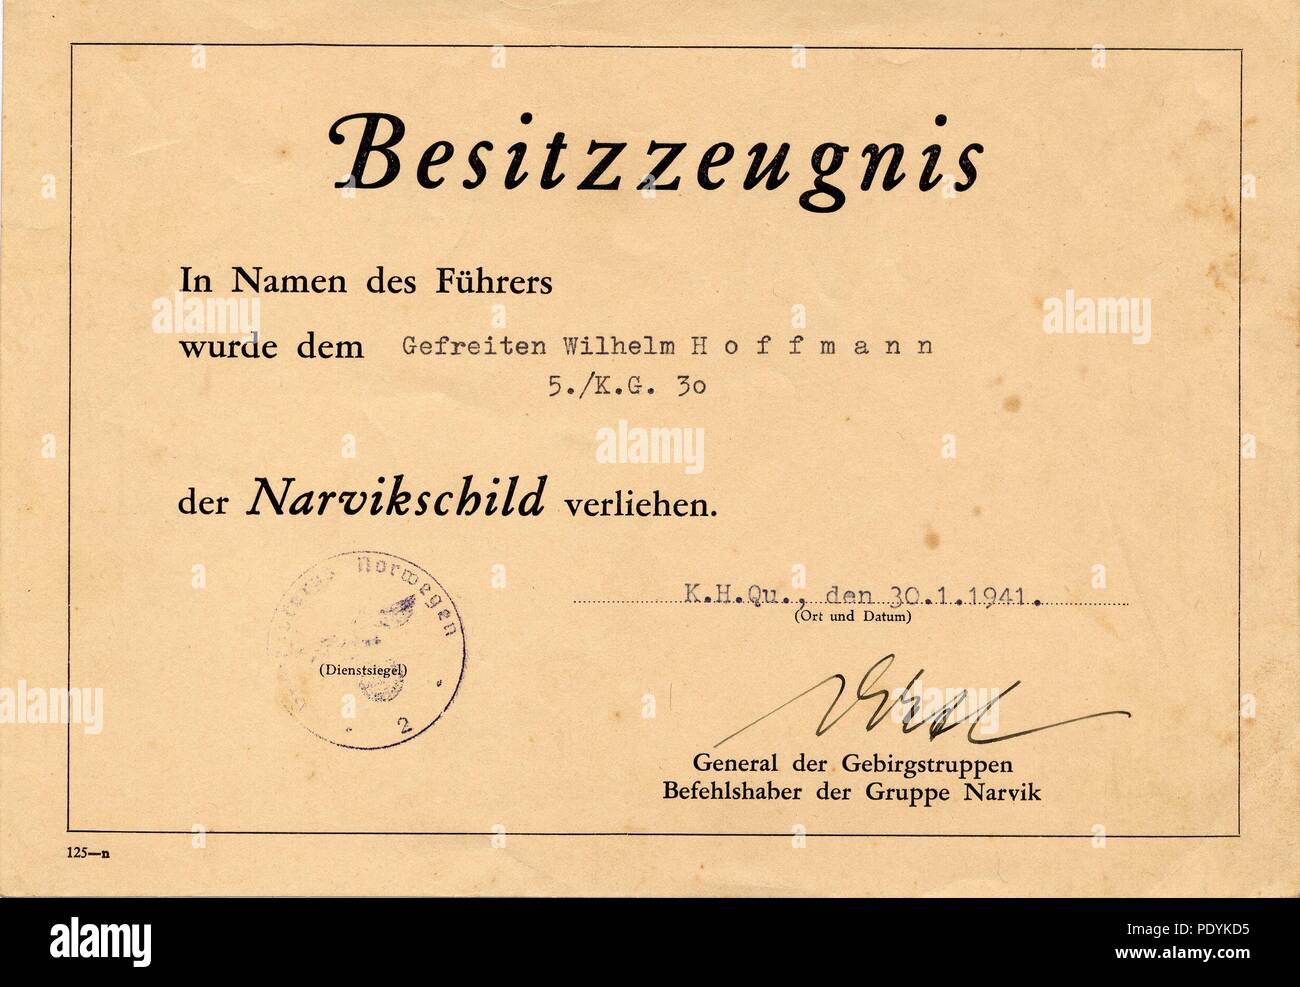 Certificate awarded to Feldwebel Willi Hoffmann of 5. Staffel, Kampfgeschwader 30: Certificate for the Narvik Shield, awarded to Willi Hoffmann of 5./KG 30 for participation in the Battle of Jarvik, Norway, in 1940. It is signed in ink by General der Gebirgstruppen Eduard Dietl, Commander in Chief of Group Narvik. Stock Photo